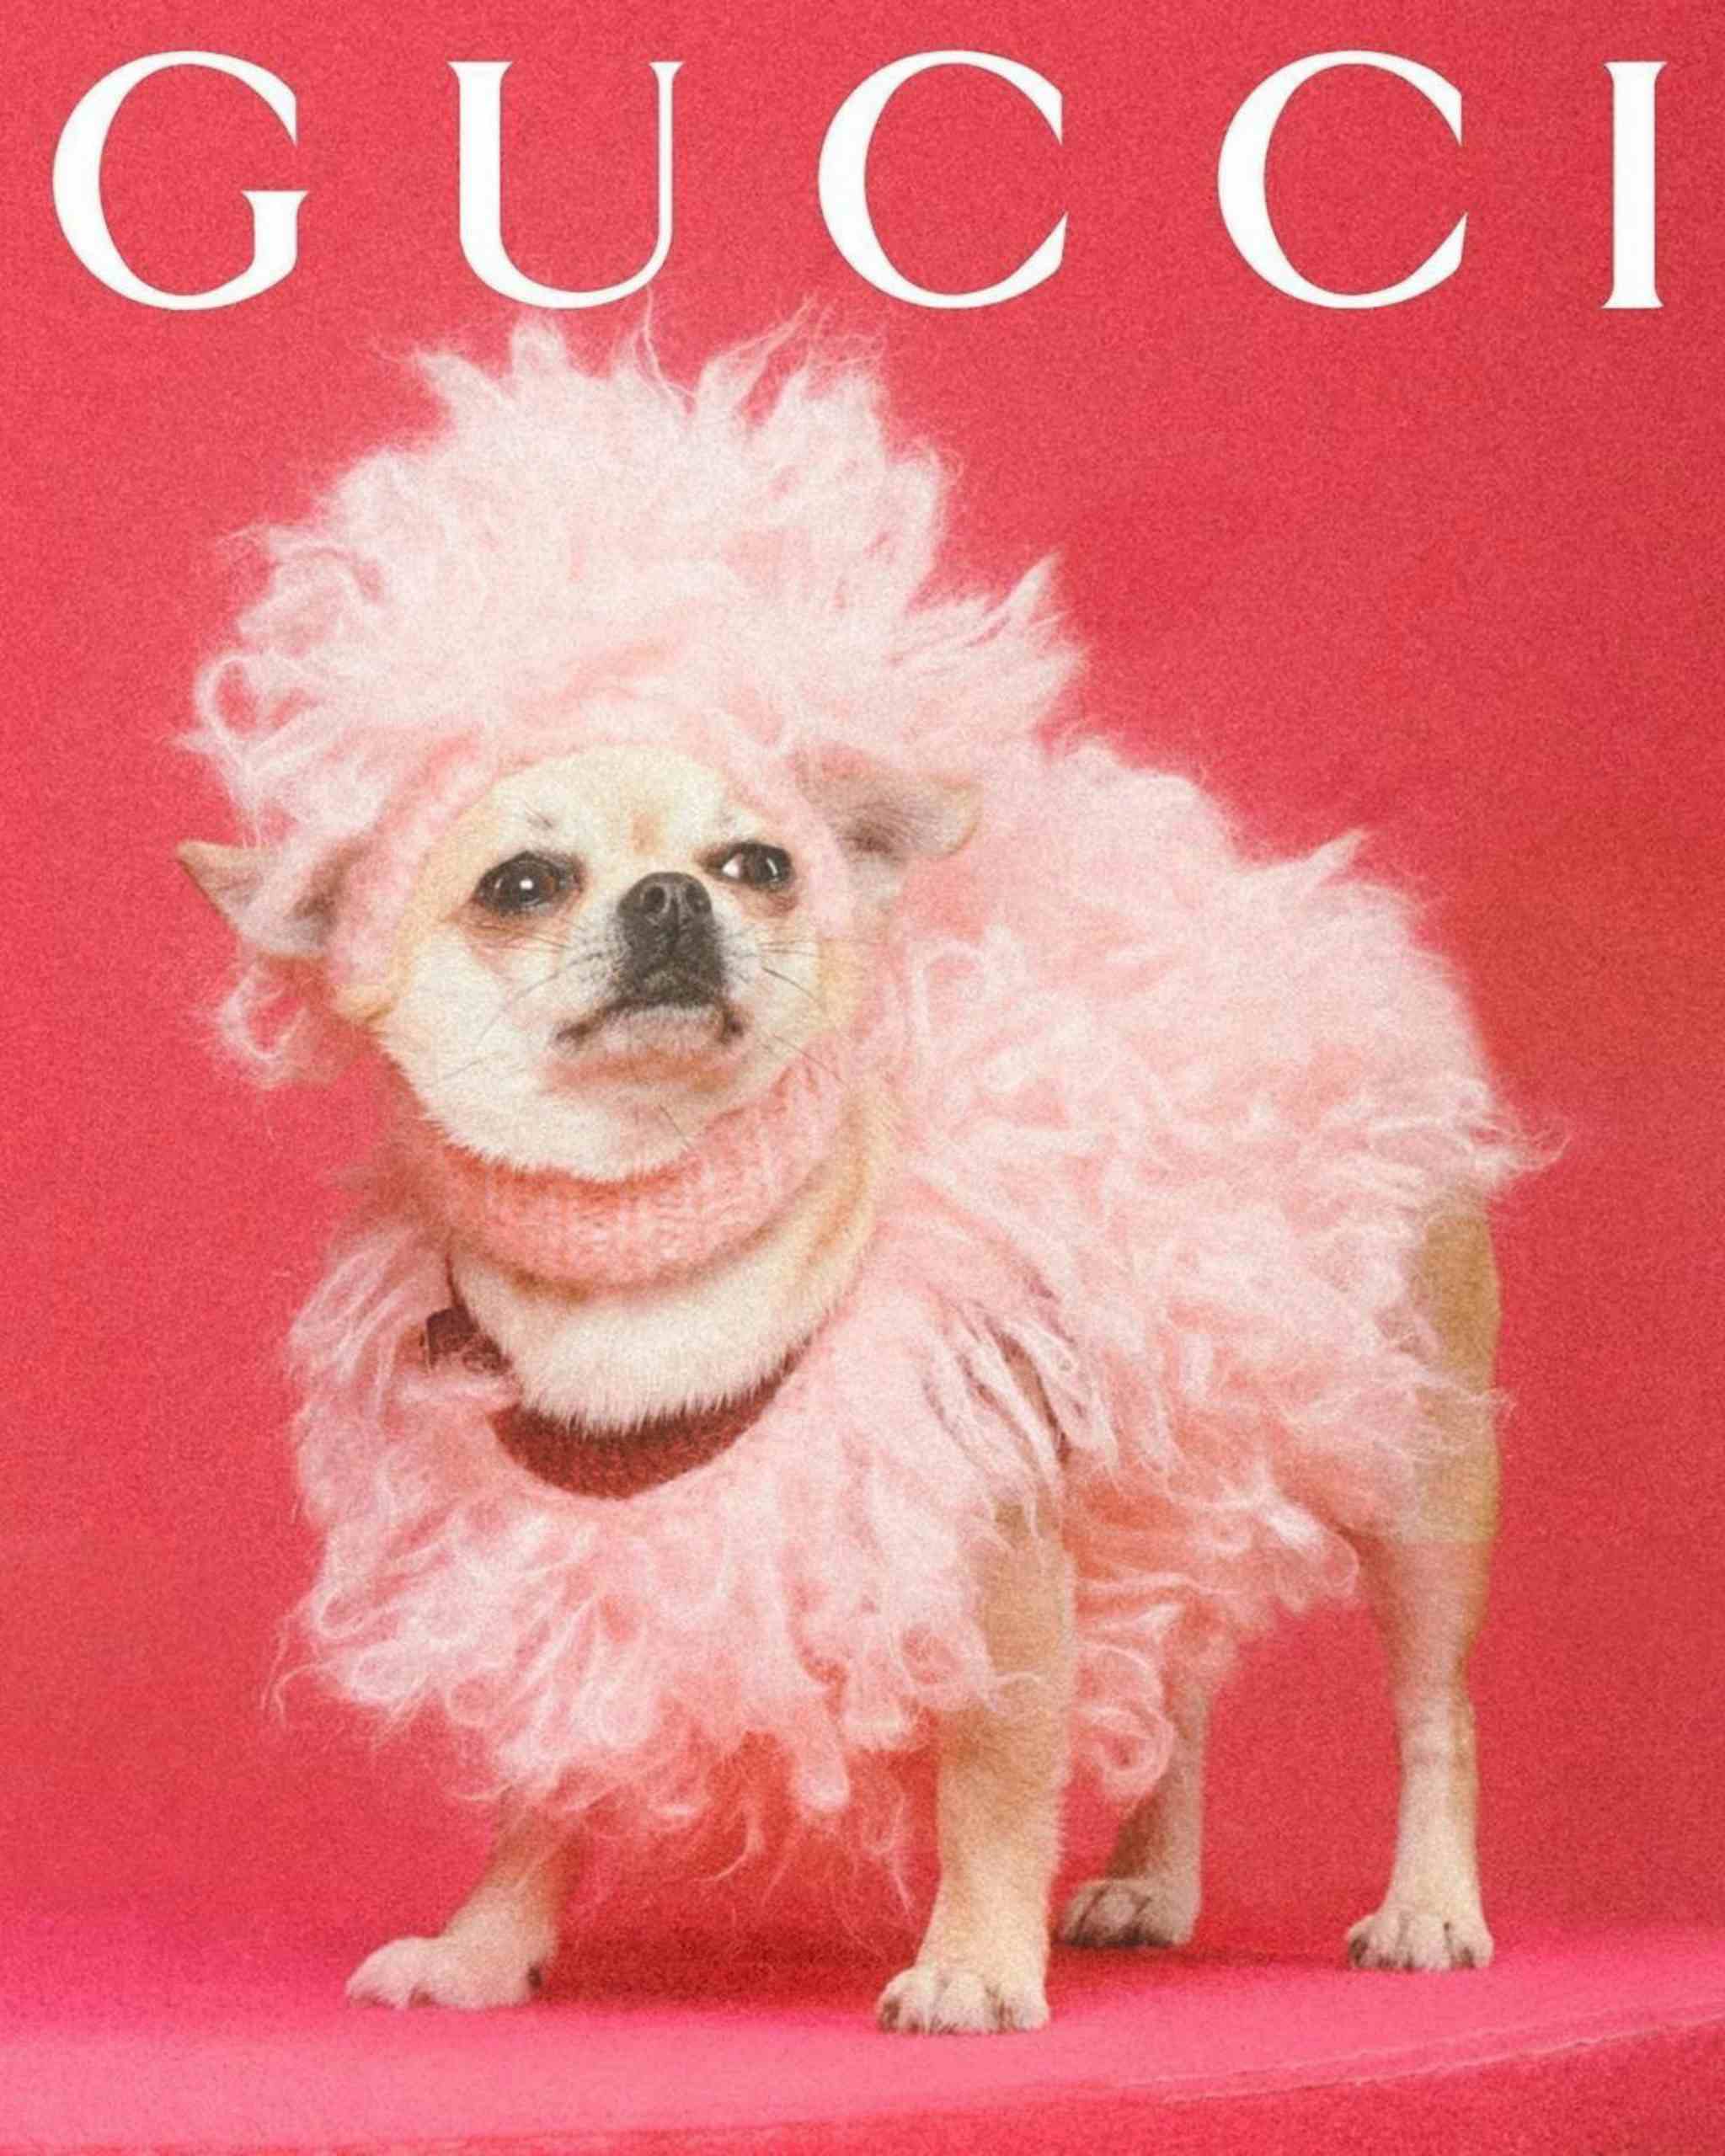 GUCCI -  Gucci Pet Collection
Photographer: Max Siedentopf
